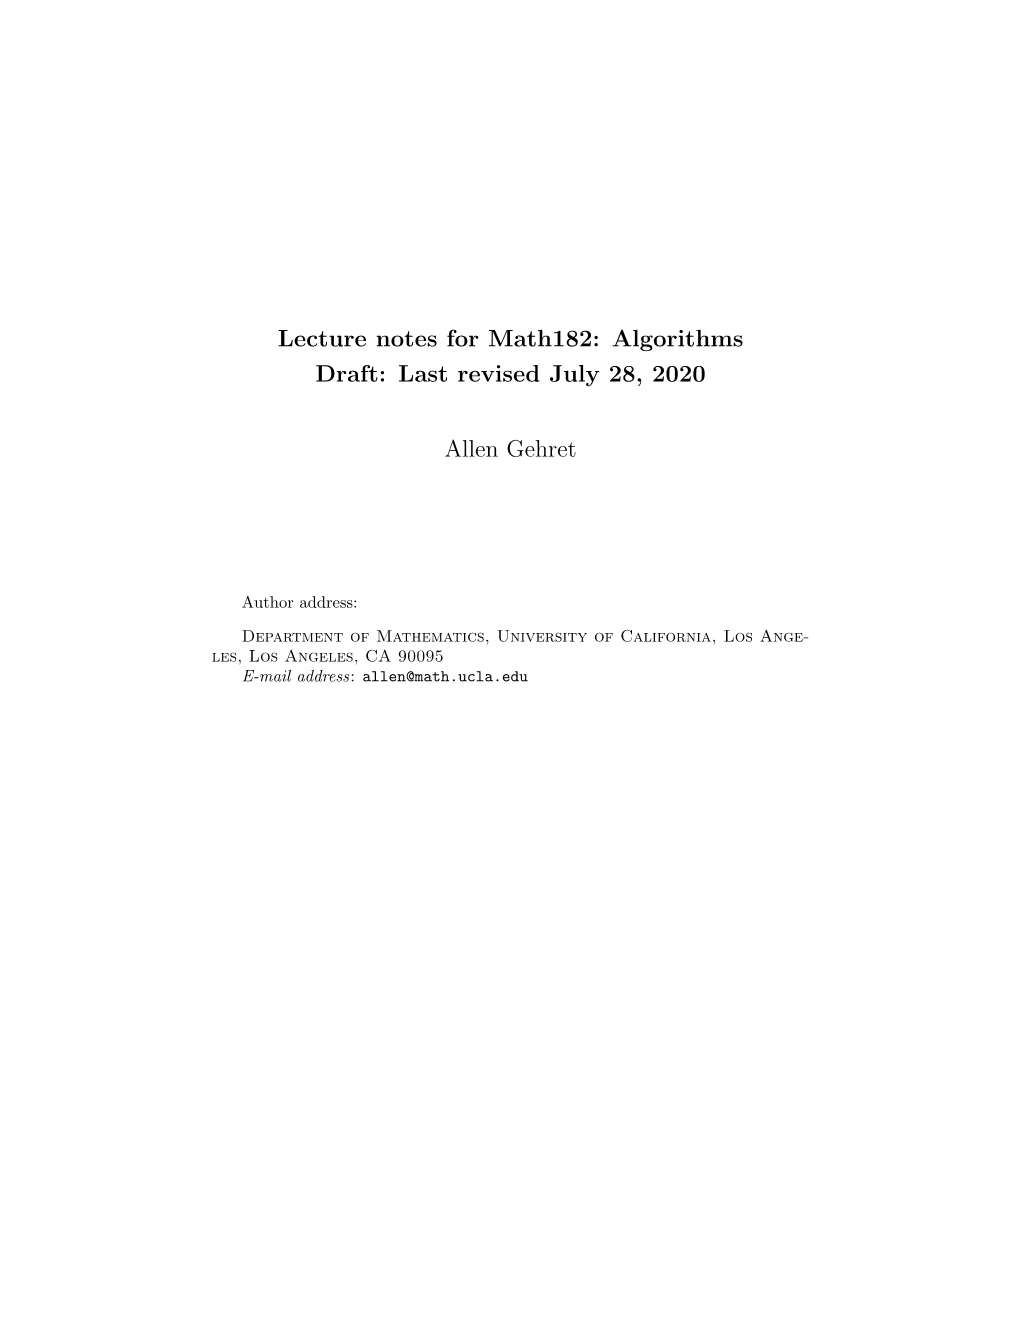 Lecture Notes for Math182: Algorithms Draft: Last Revised July 28, 2020